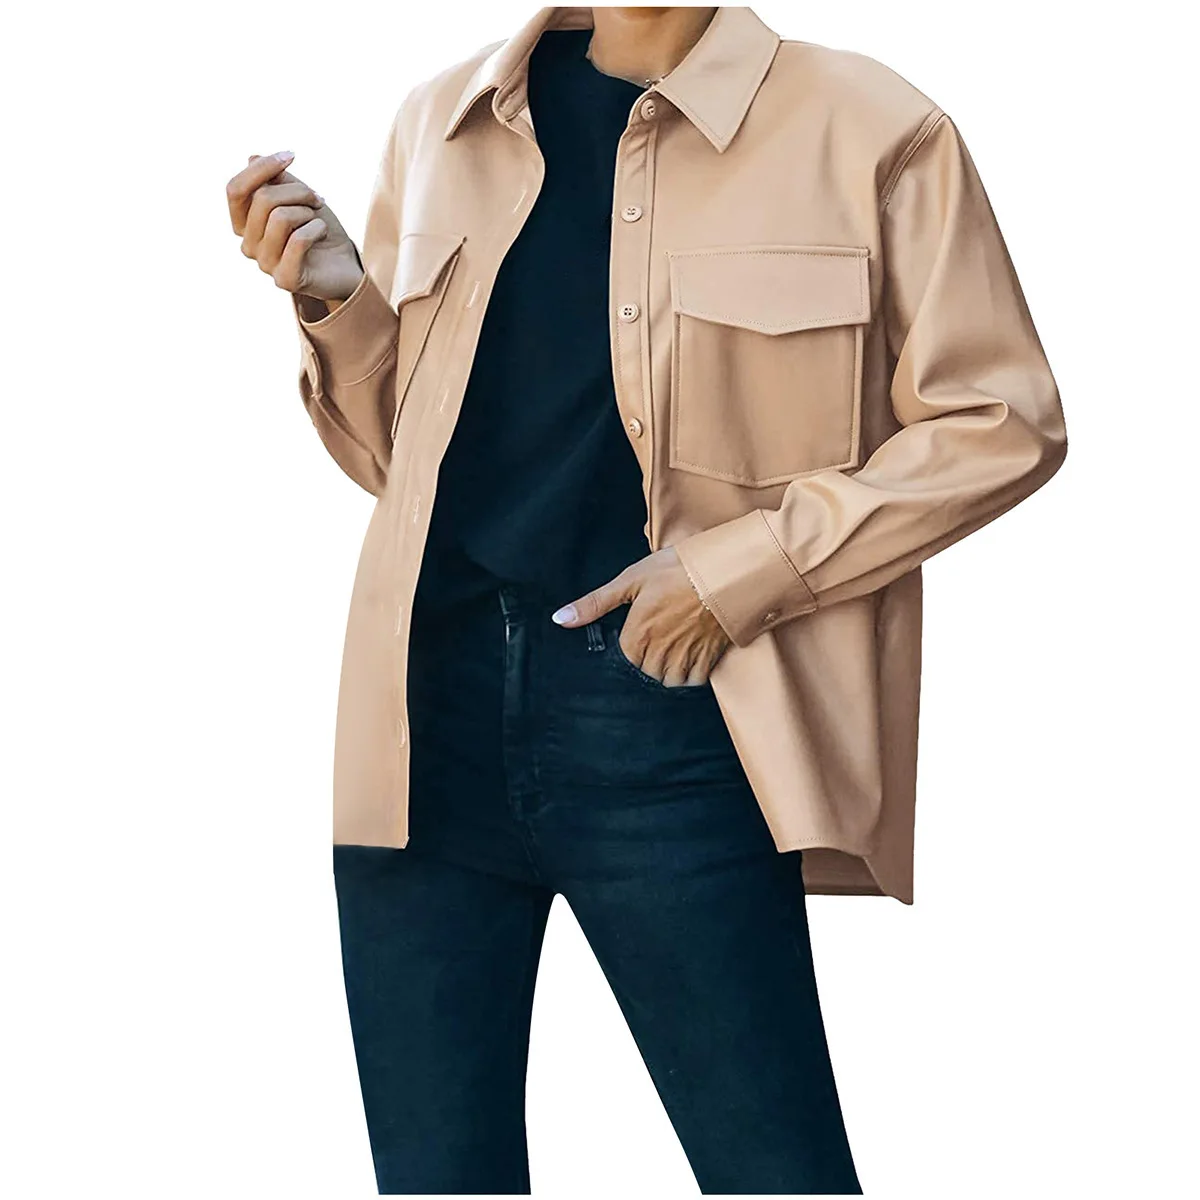 Women's Front Bbutton Faux Leather Jacket Casual Solid Color Button with Pockets Coat Casual Female Outerwear Jackets Streetwear enlarge